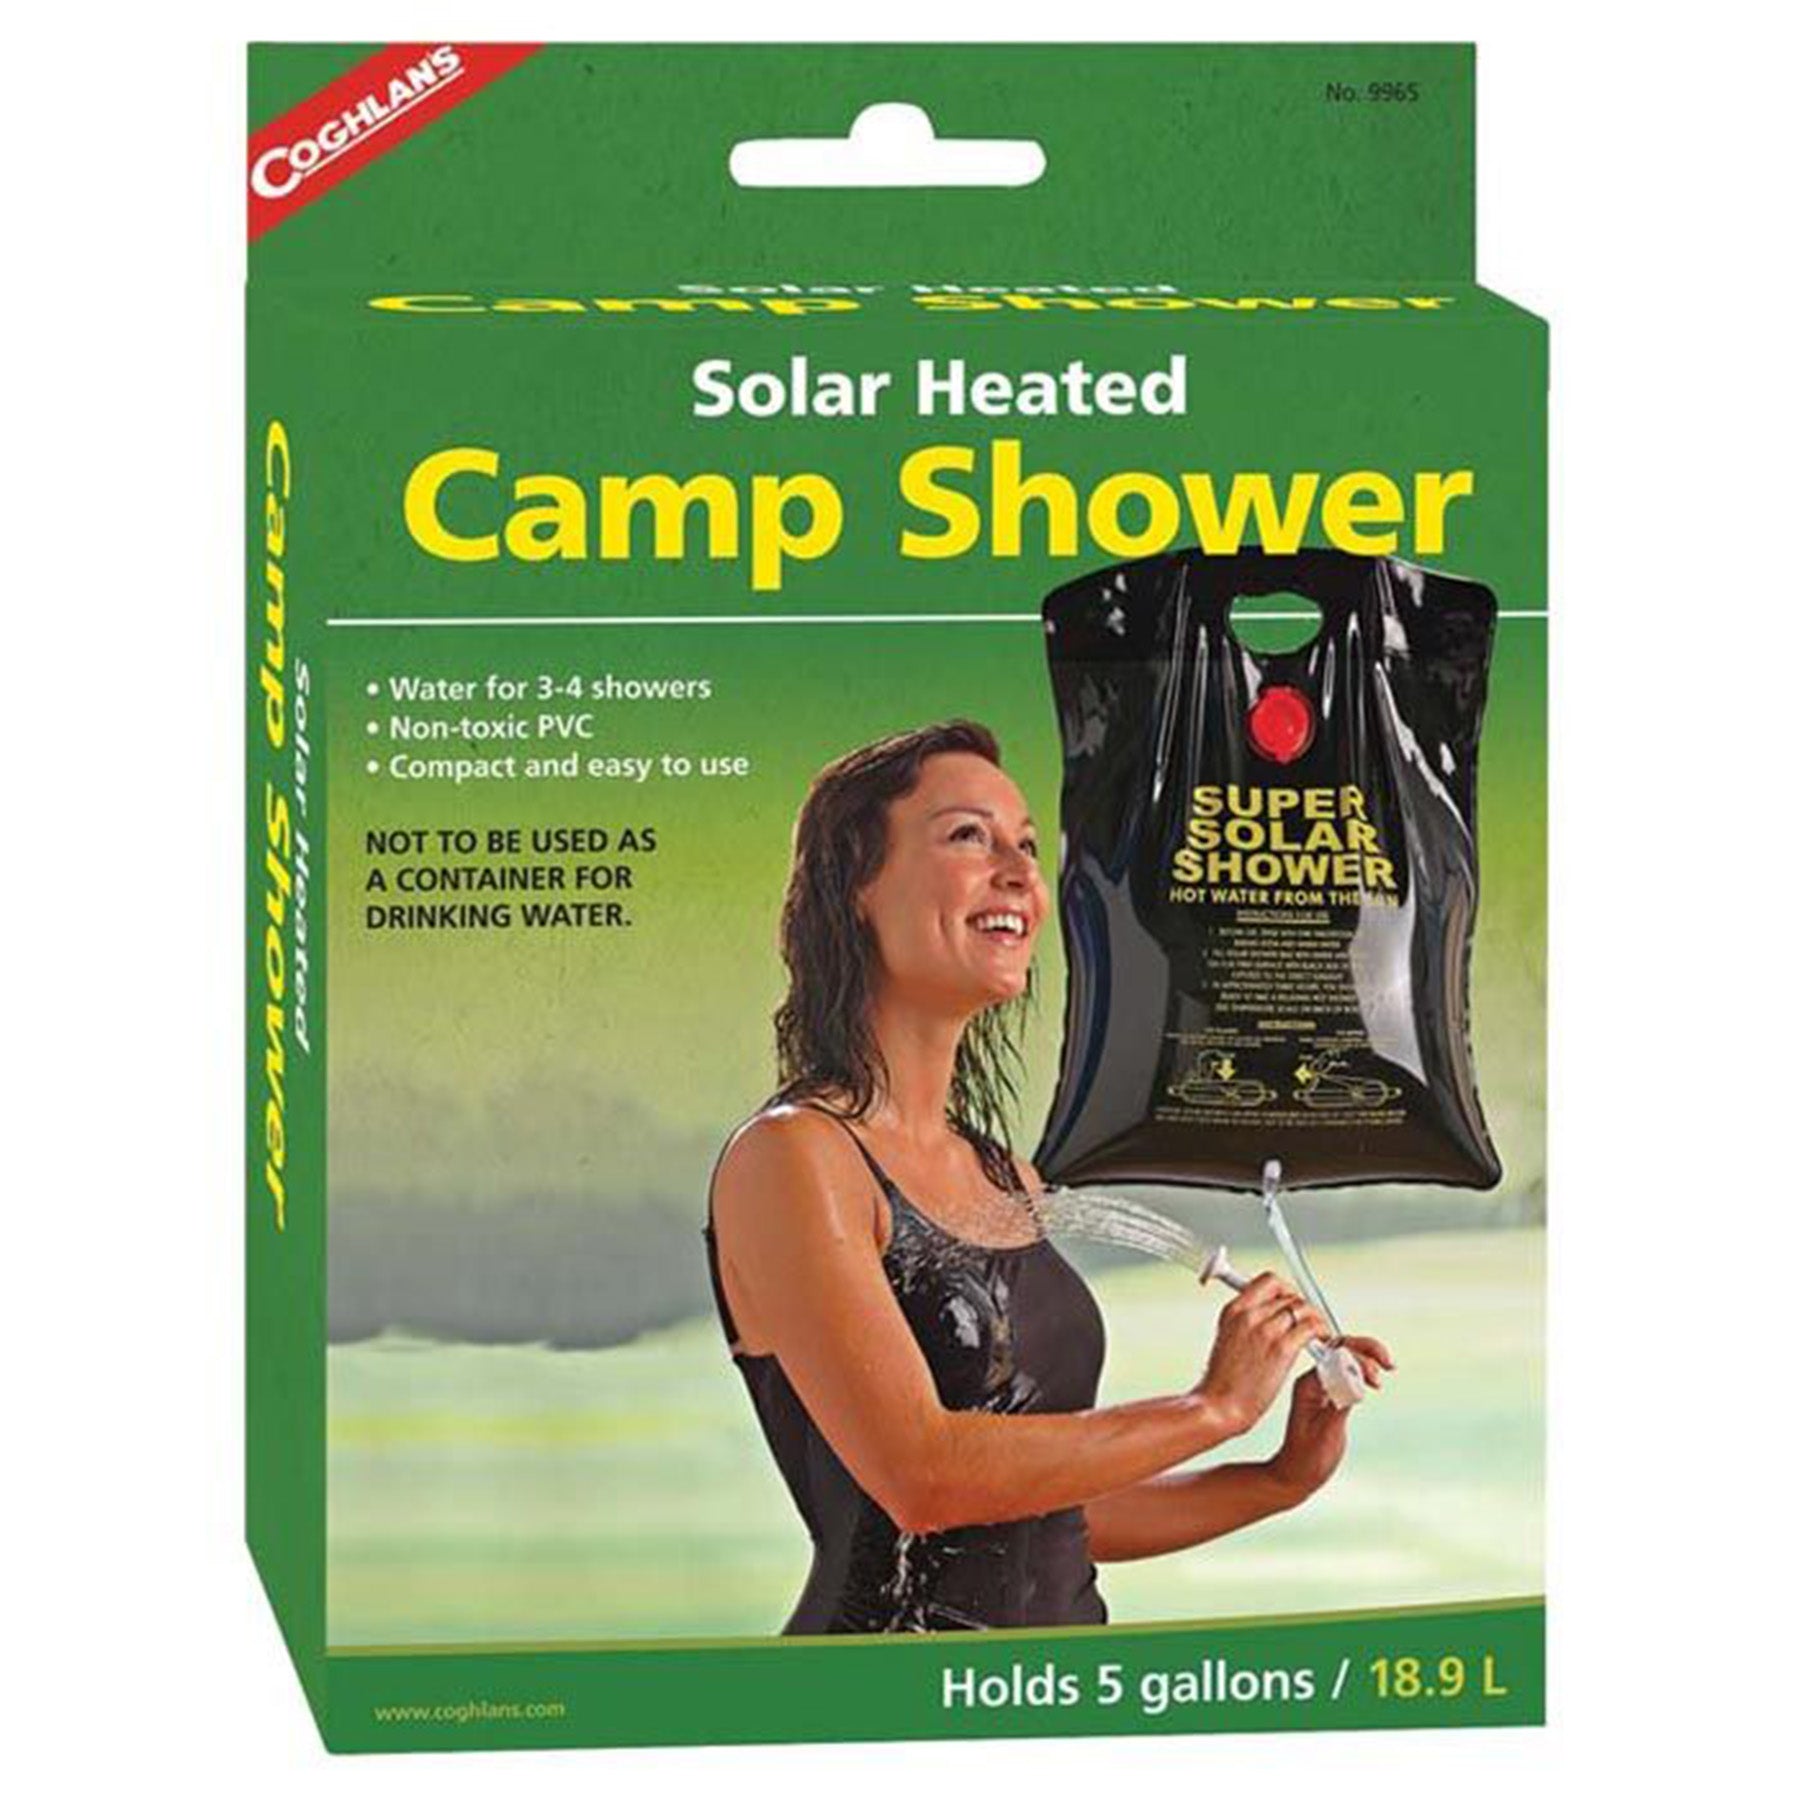 coghlan's solar heated camp shower 5 gallons